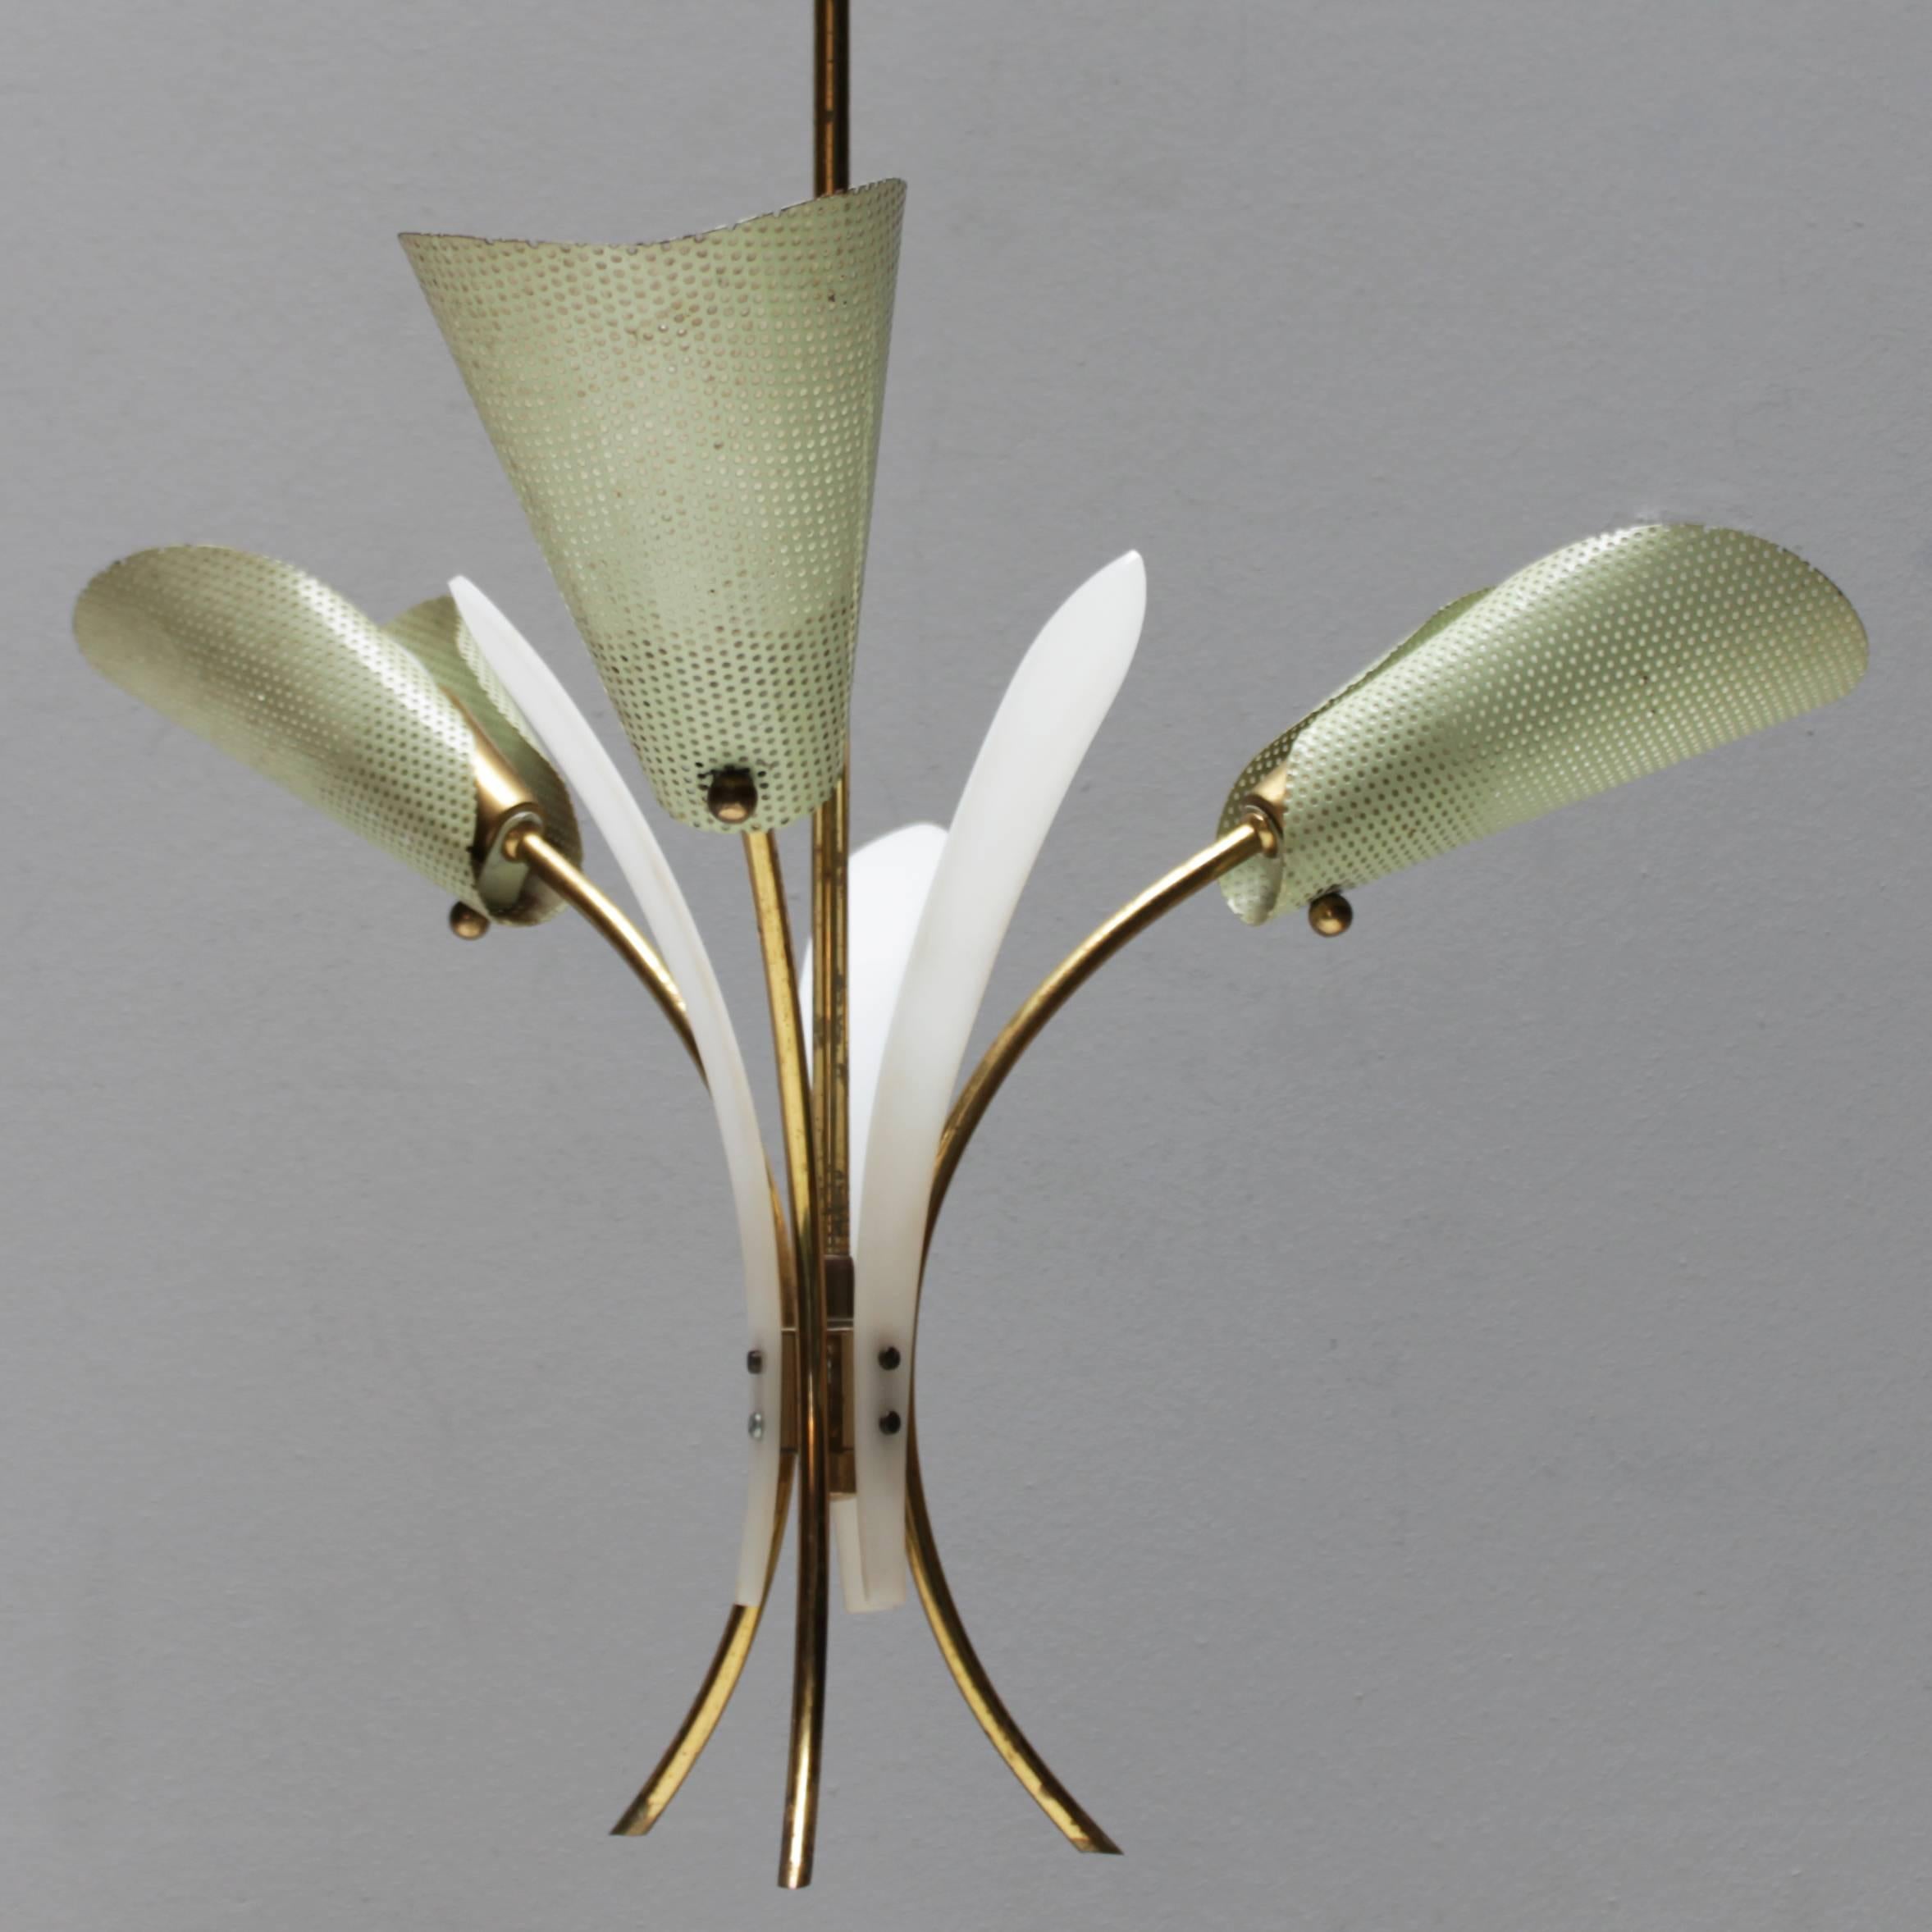 Chandelier in the style of Mathieu Mategot, France. Brass fixture with three mint green perforated shades and three white acrylic leafs. Good vintage condition. Measurements: height from ceiling till drop: 33.5 in. (85 cm), length rod 15.7 in. (40